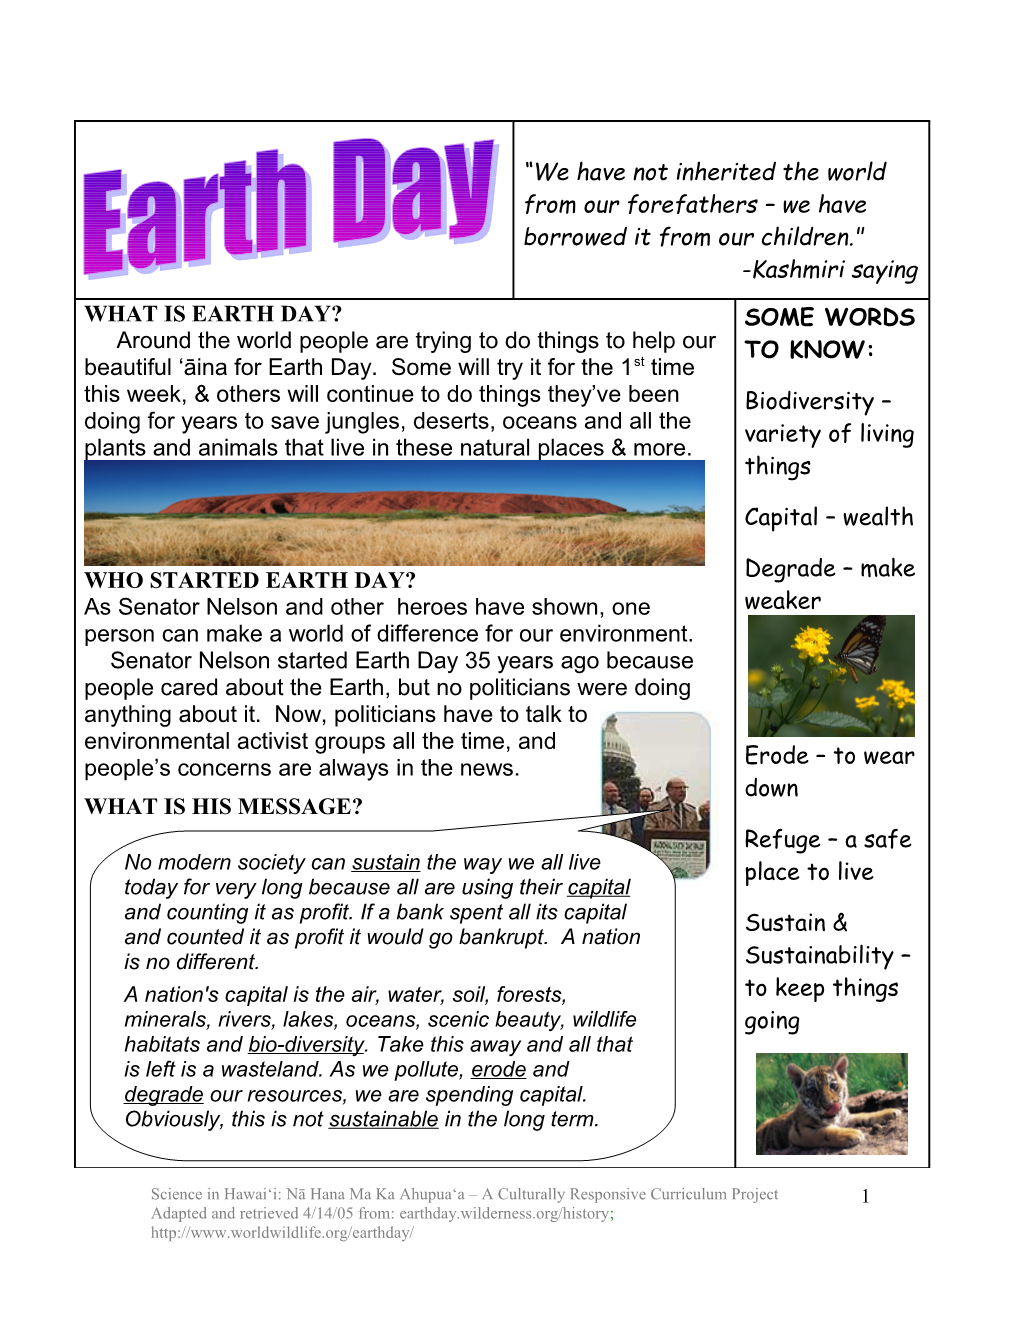 BONUS QUESTION for EARTH DAY